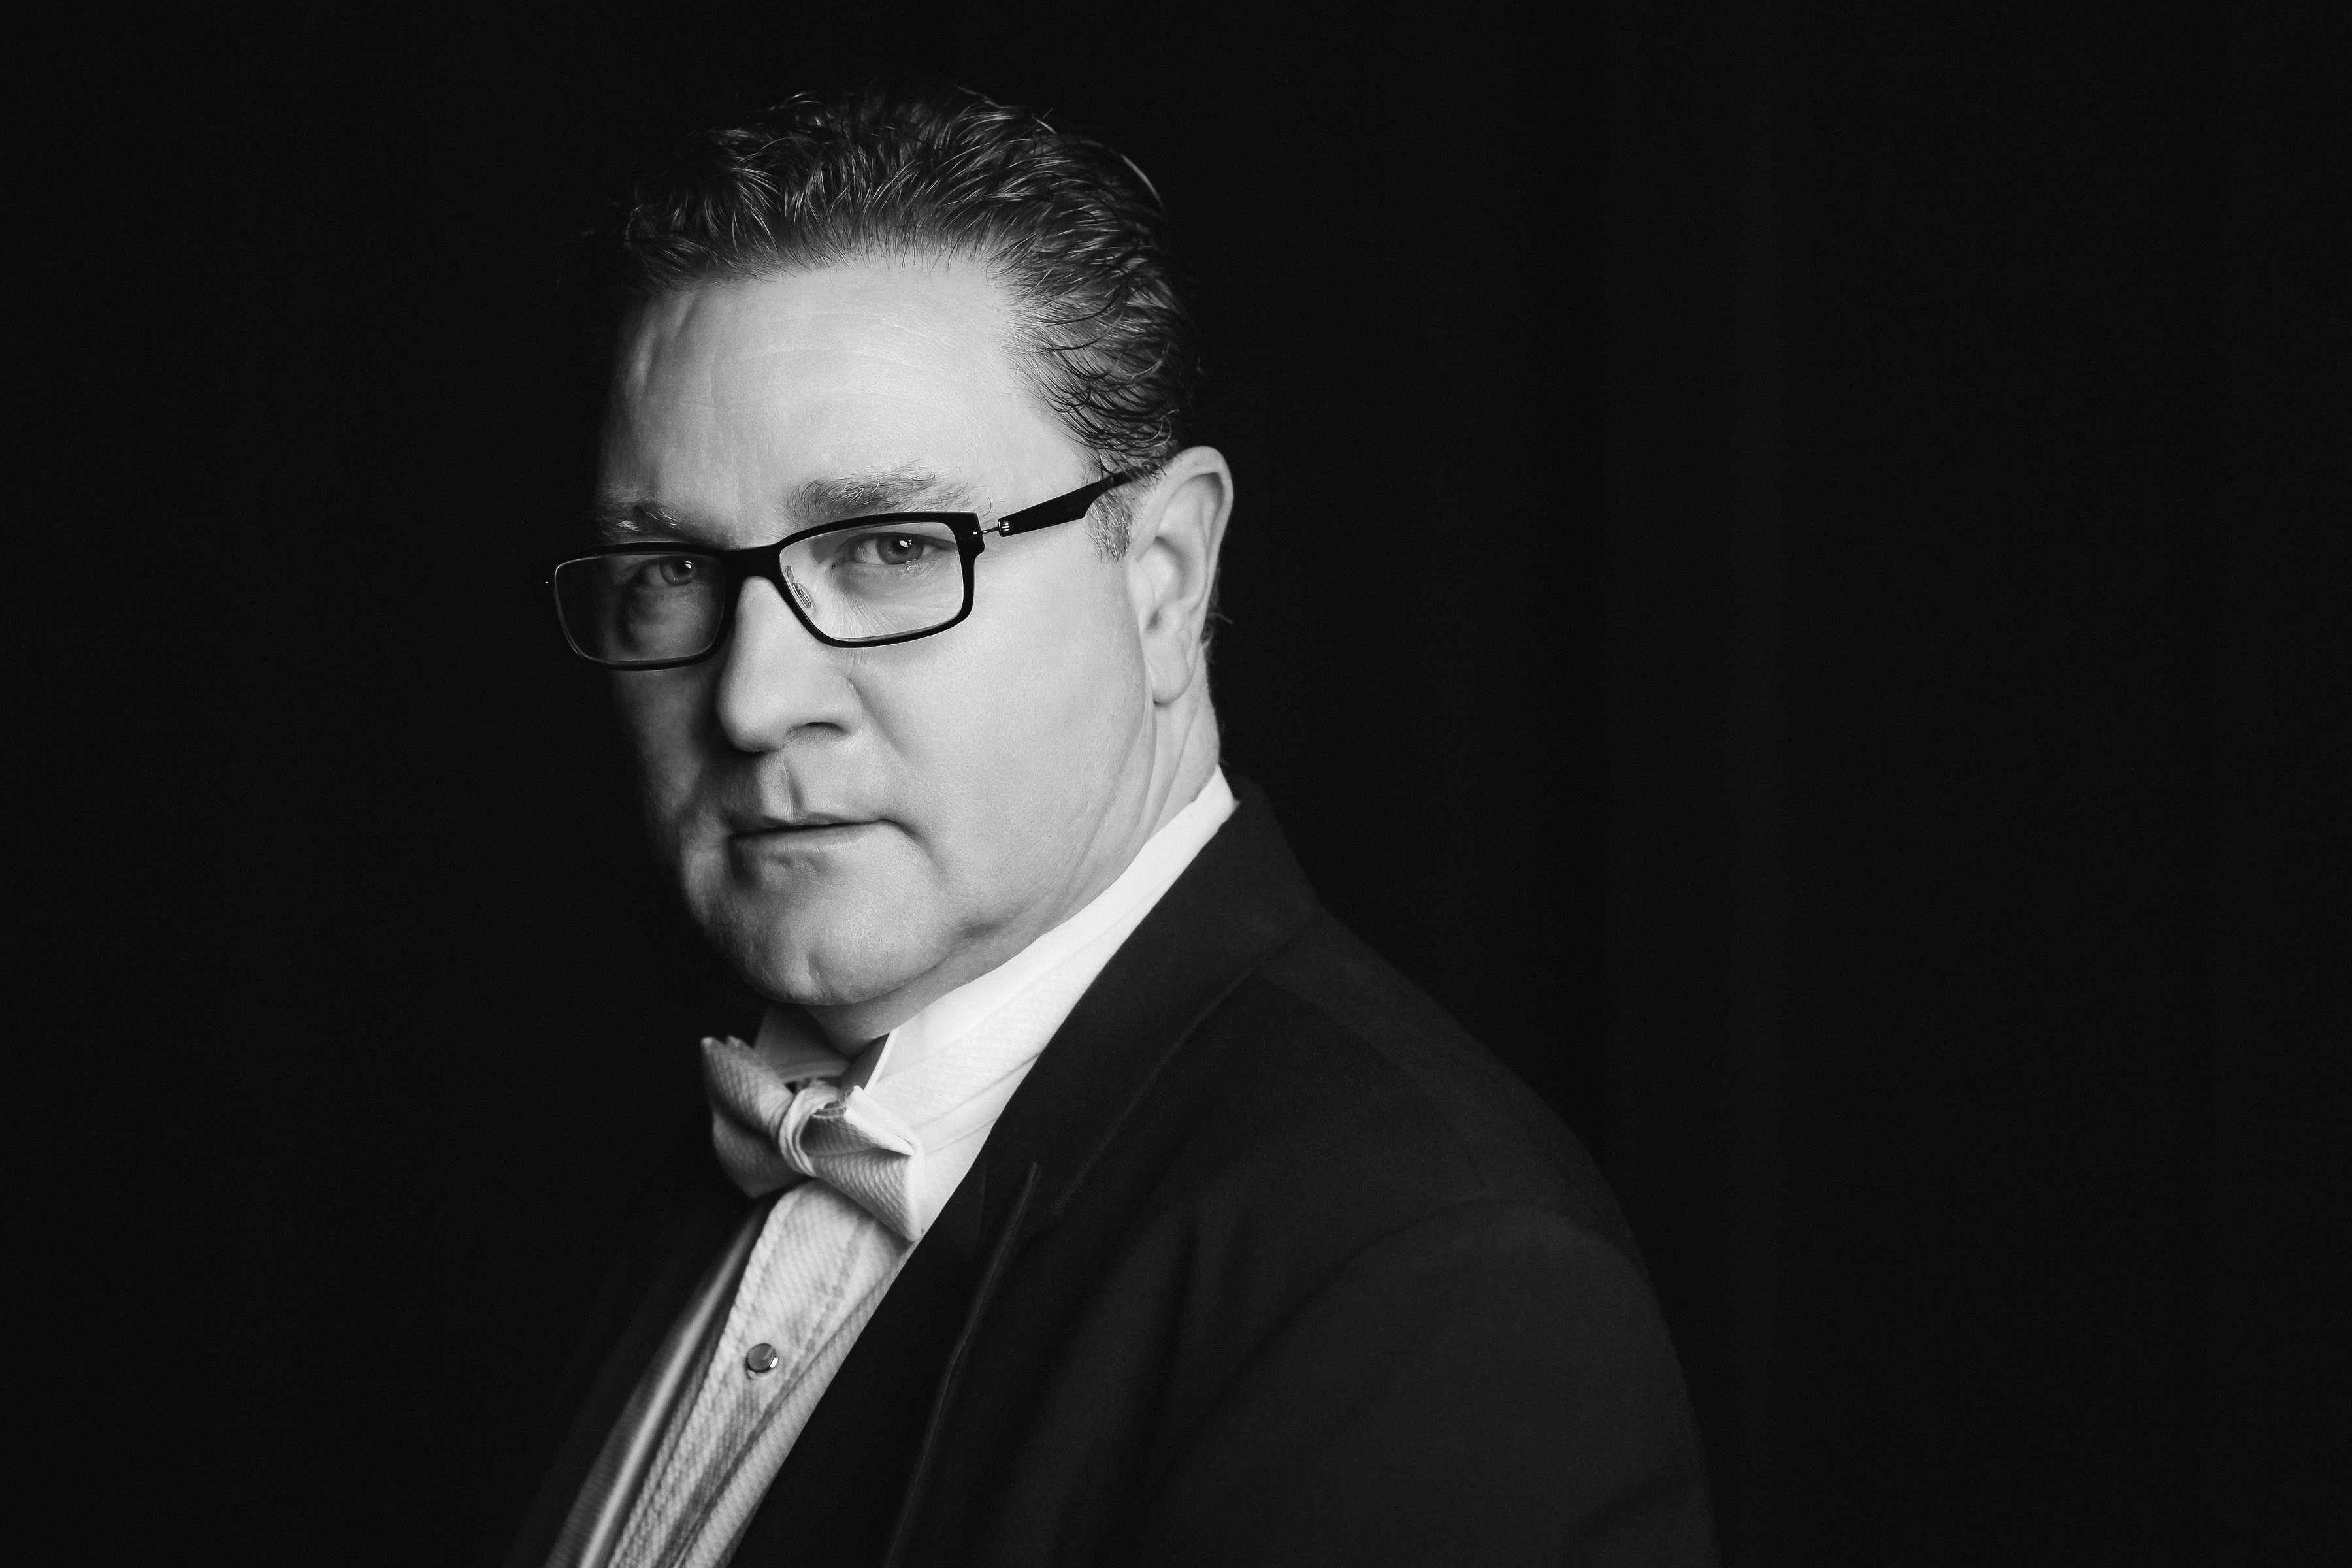 Announcing Voices new Artistic Director and Conductor, Stephen Futrell